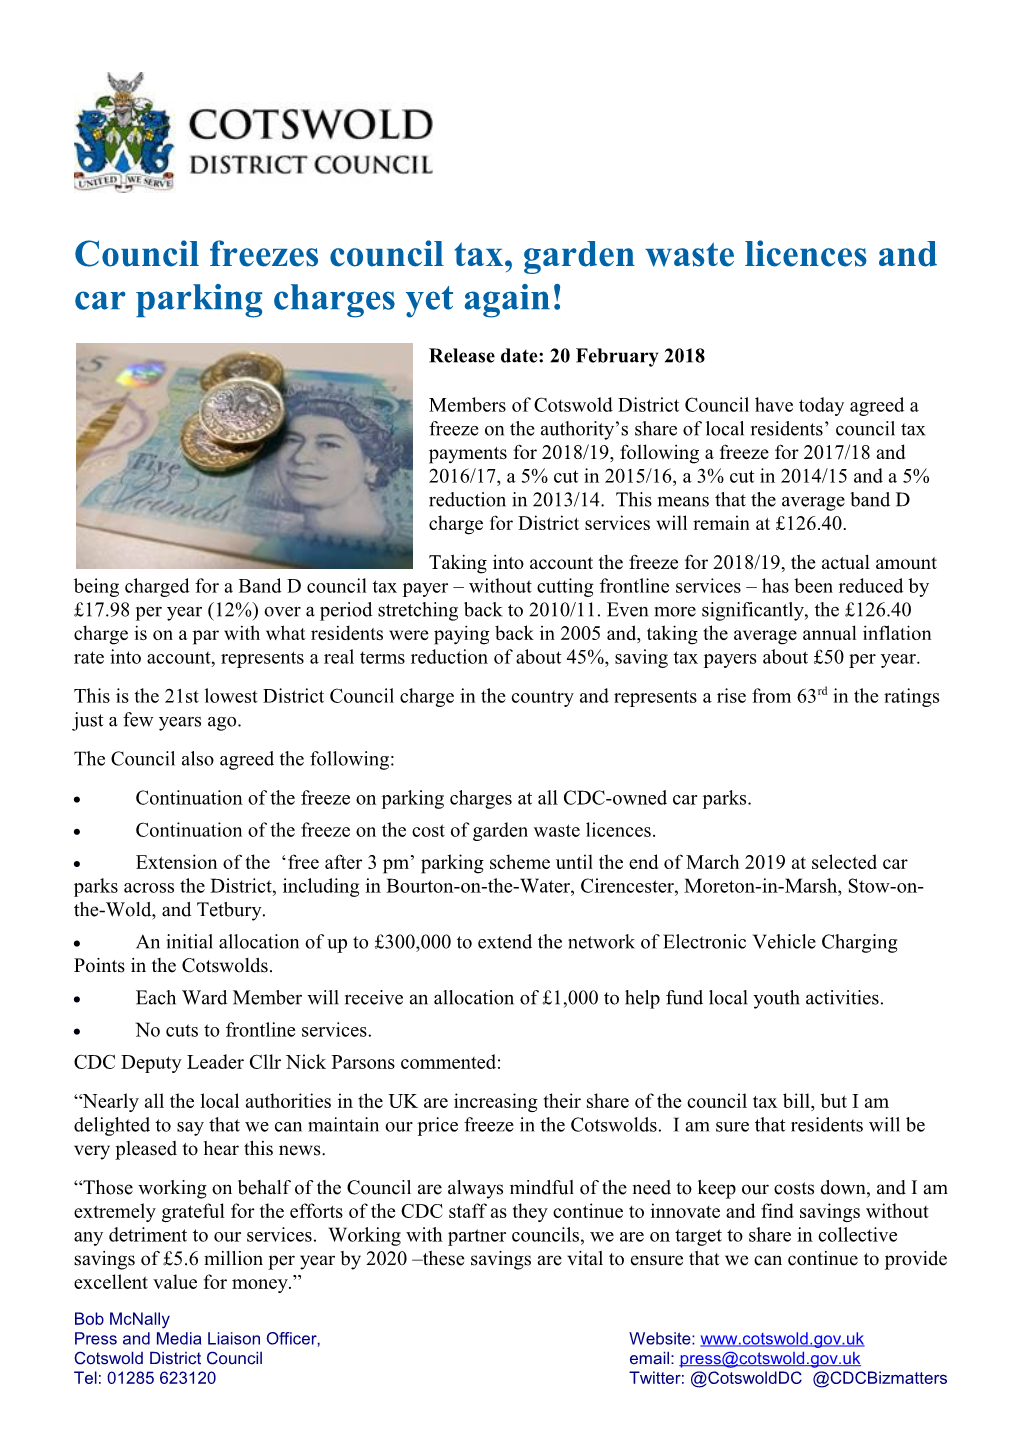 Council Freezes Council Tax, Garden Waste Licences and Car Parking Charges Yet Again!